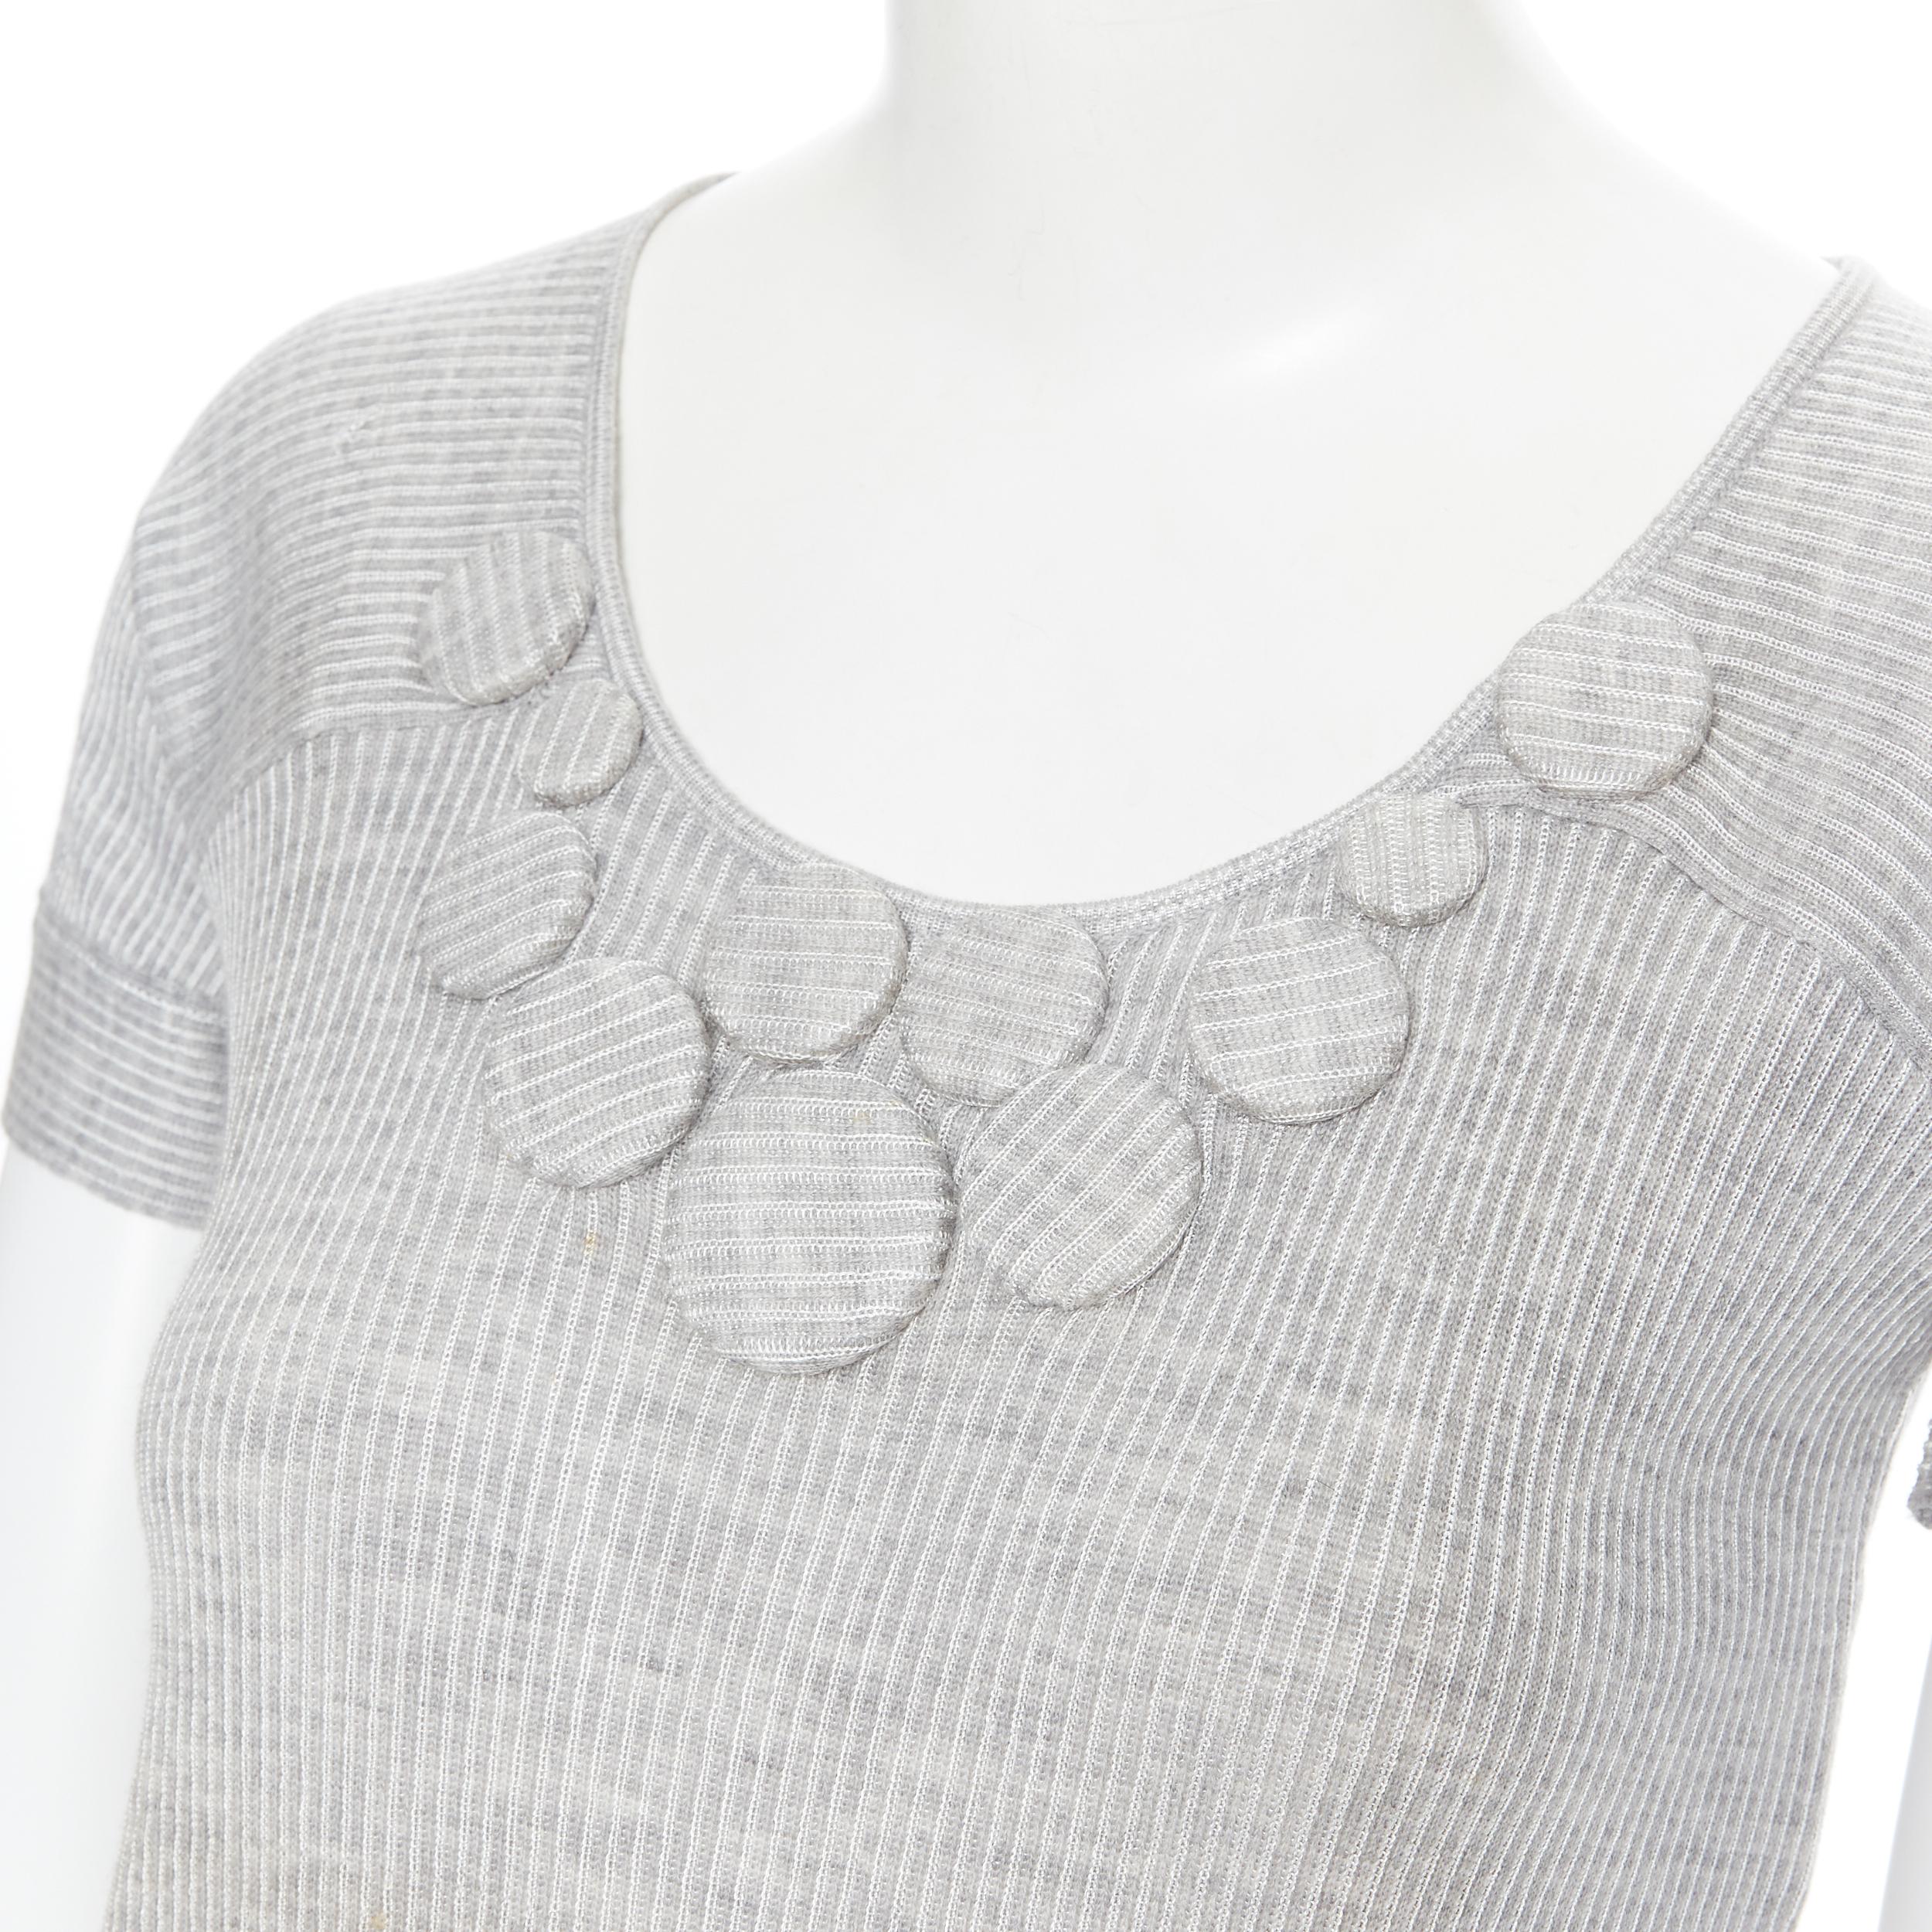 CHRISTIAN DIOR grey struoed viscose wool fabric brooch button sweater top FR36
Brand: Christian Dior
Designer: Christian Dior
Model Name / Style: Sweater top
Material: Viscose, wool
Color: Grey
Pattern: Striped
Extra Detail: Fabric covered button